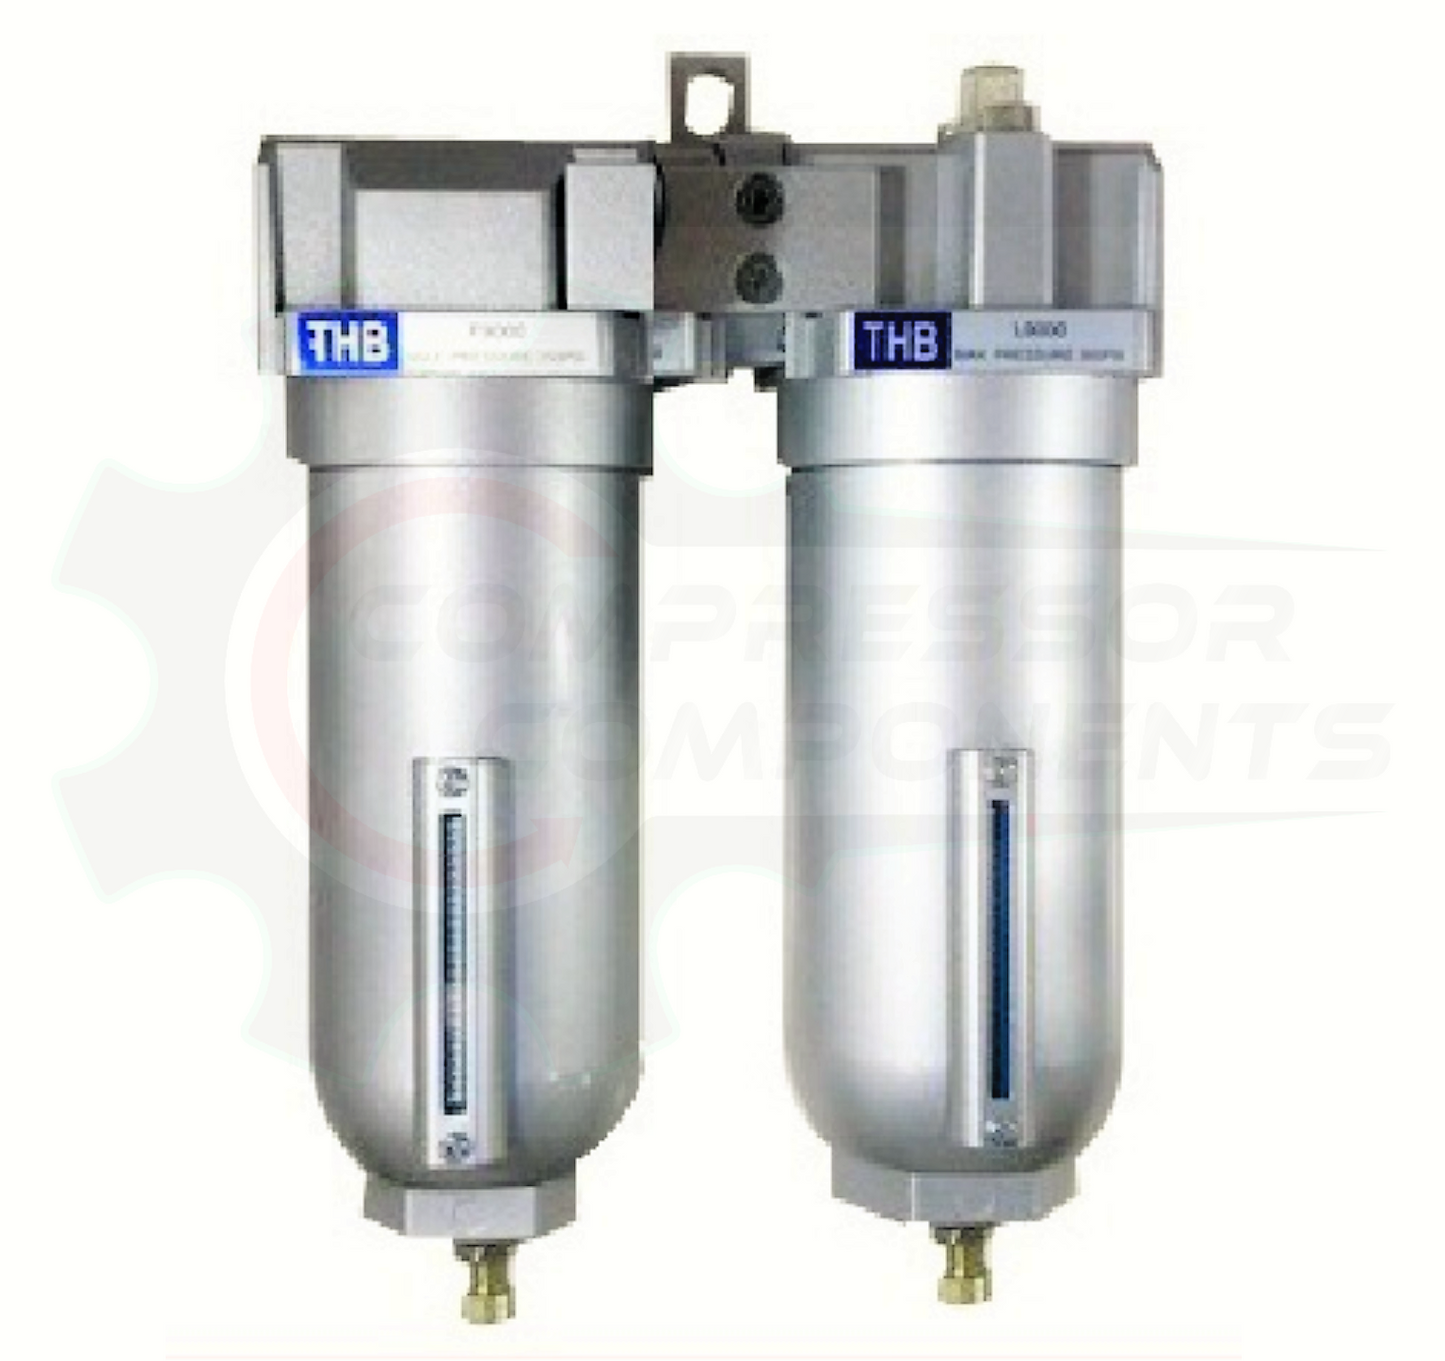 THB F90-FM968 - 2 STAGE PARTICULATE & COALESCING FILTER COMBO - 1" FNPT / 175 CFM